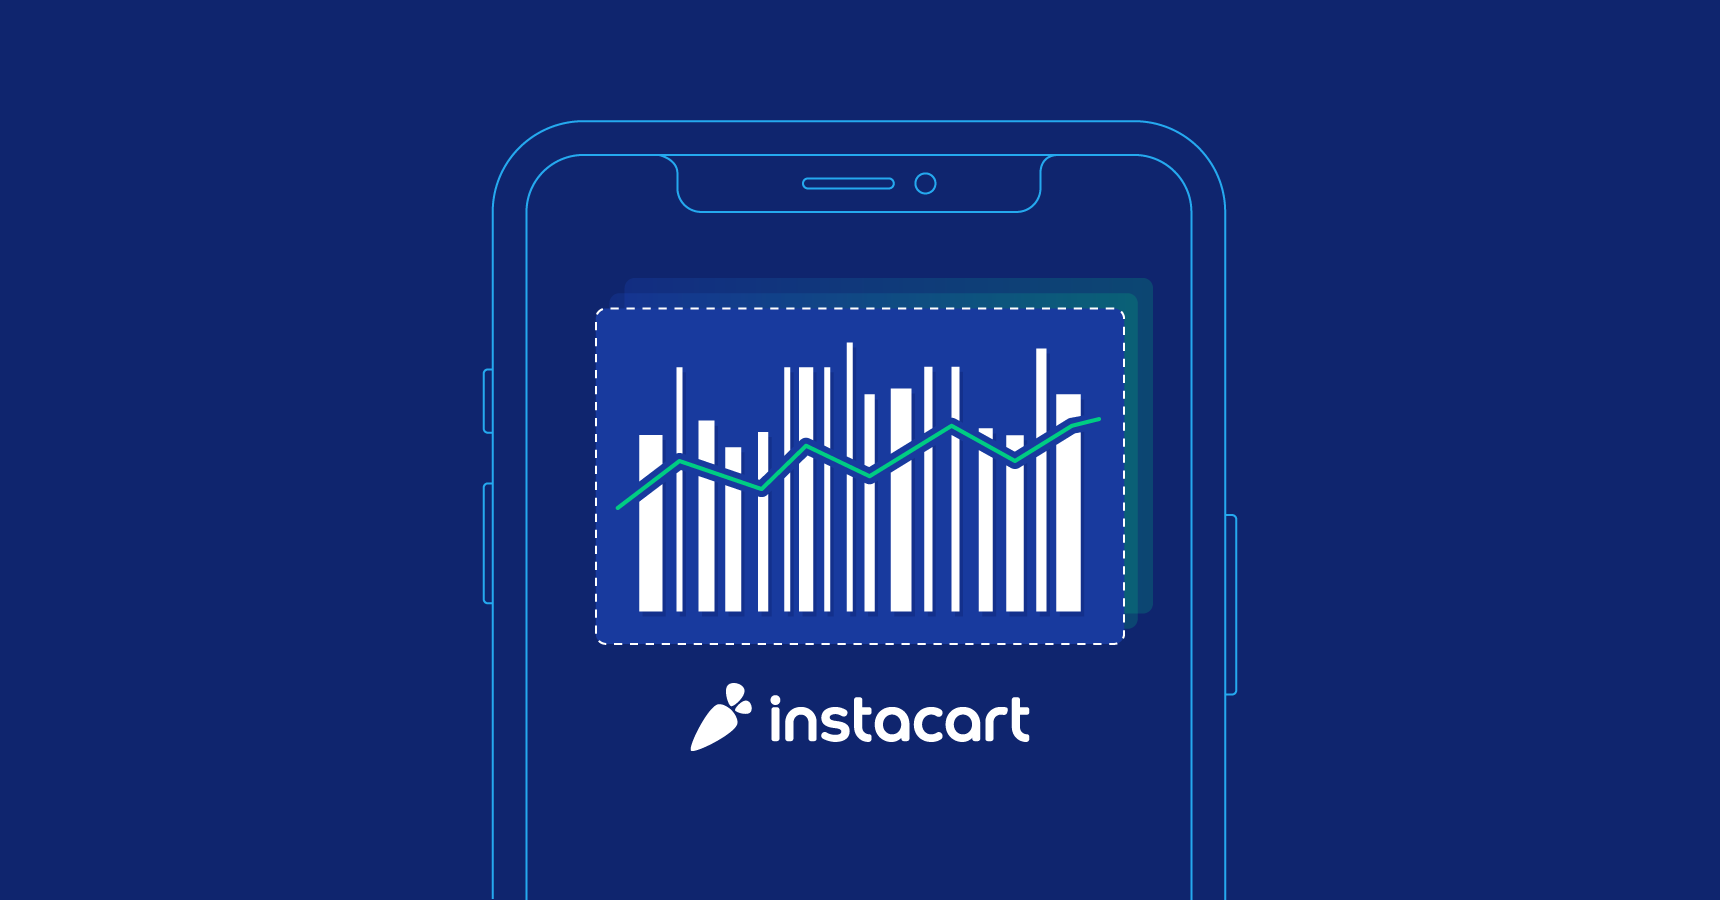 Is $4.2 Billion Reasonable? How to Evaluate Instacart's Valuation